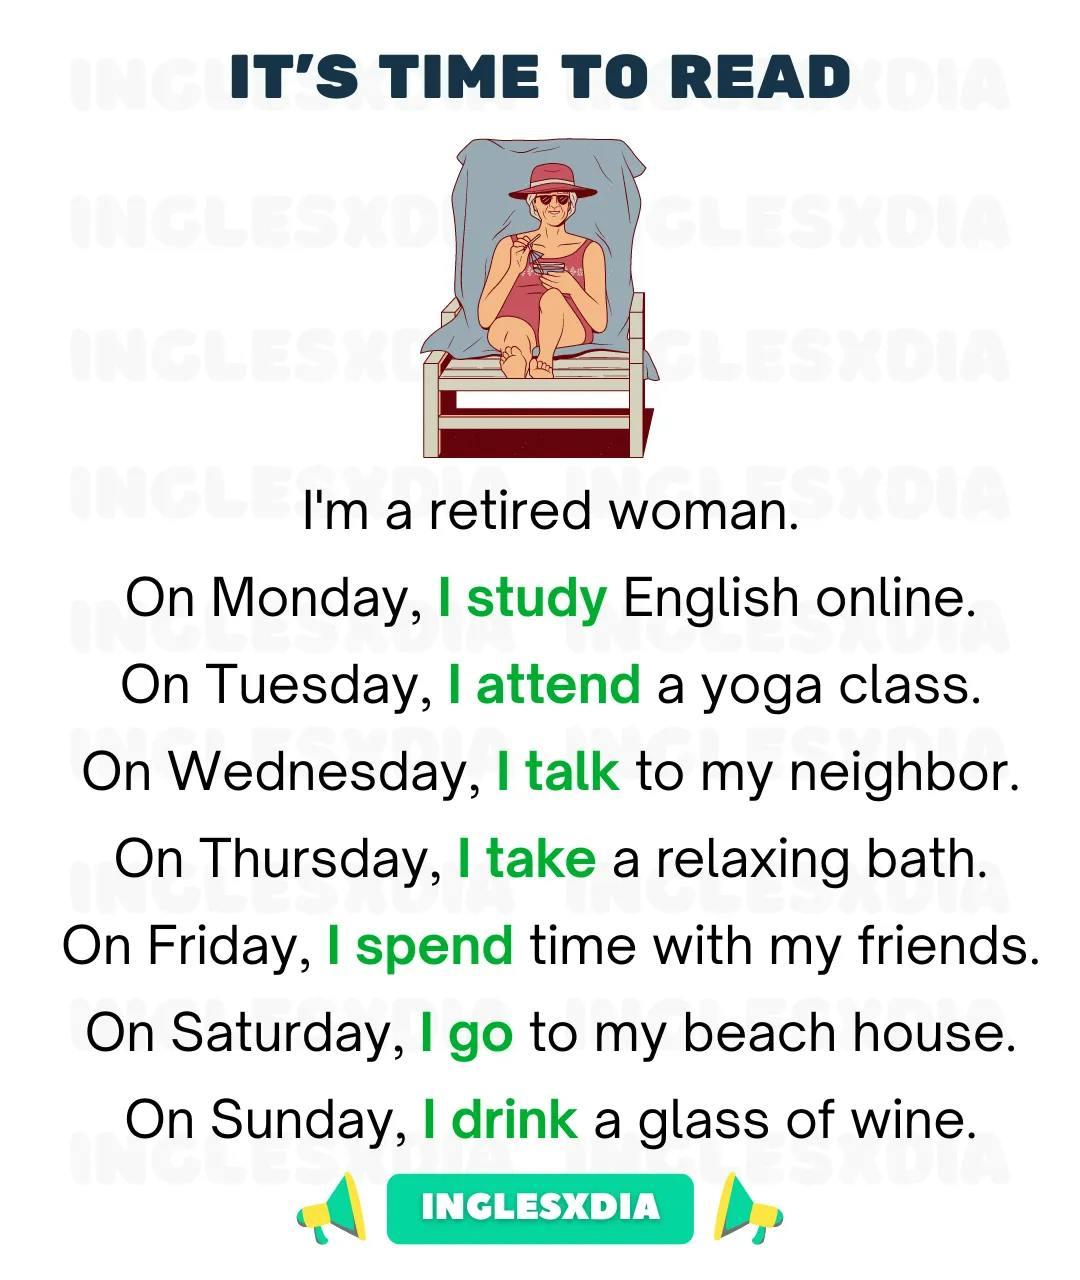 Retired Woman's Routine